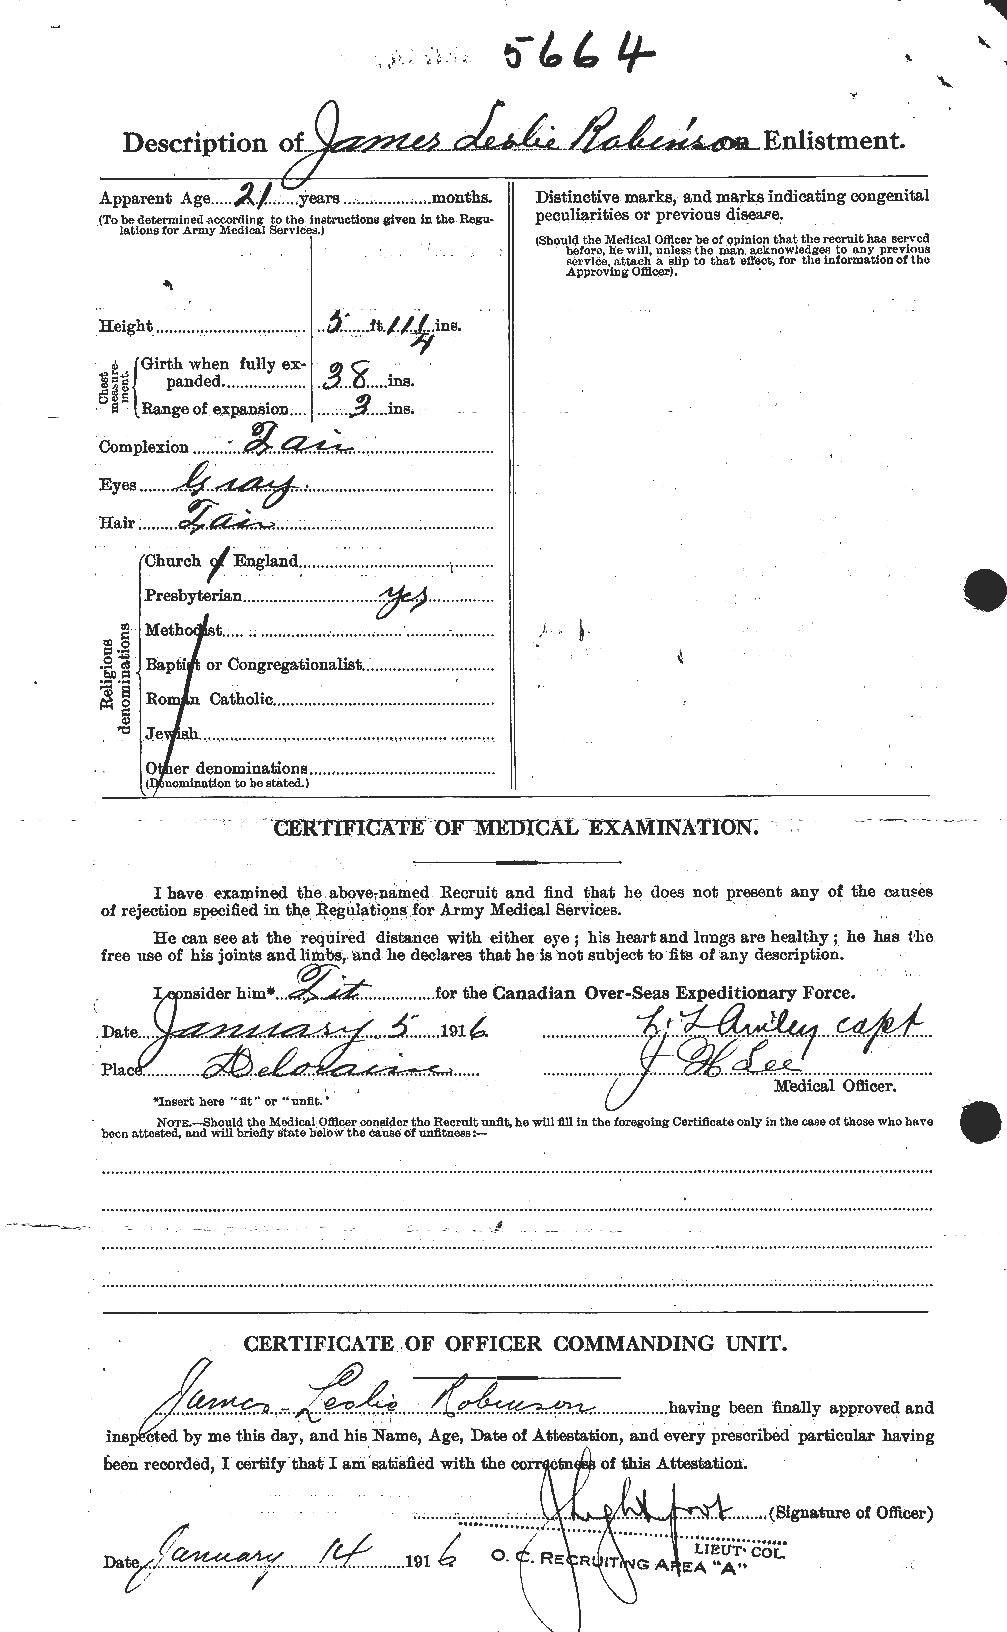 Personnel Records of the First World War - CEF 611472b